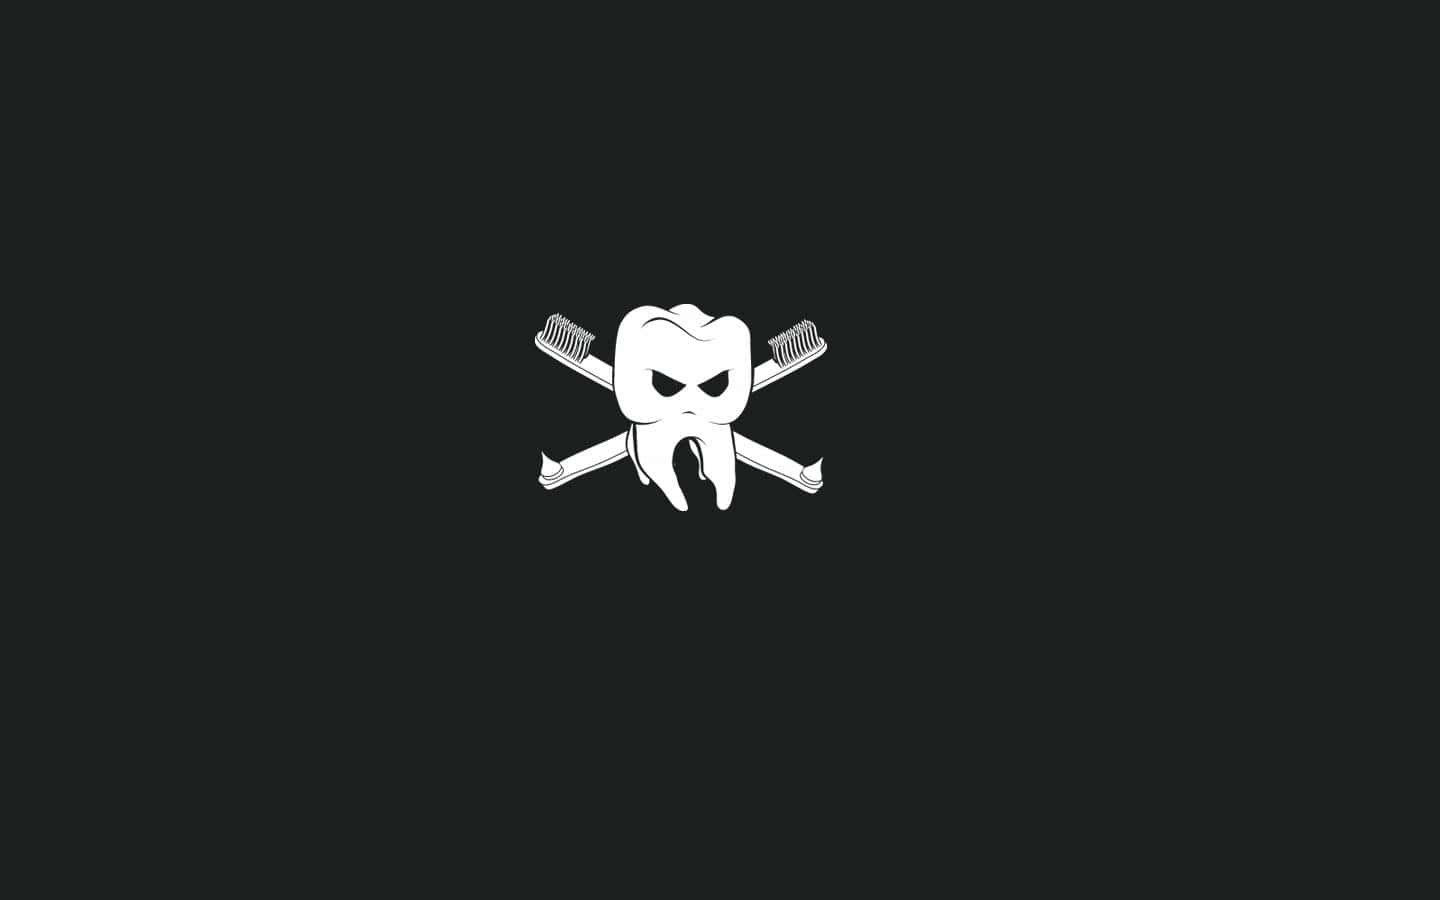 A Tooth Logo With Crossed Swords On A Black Background